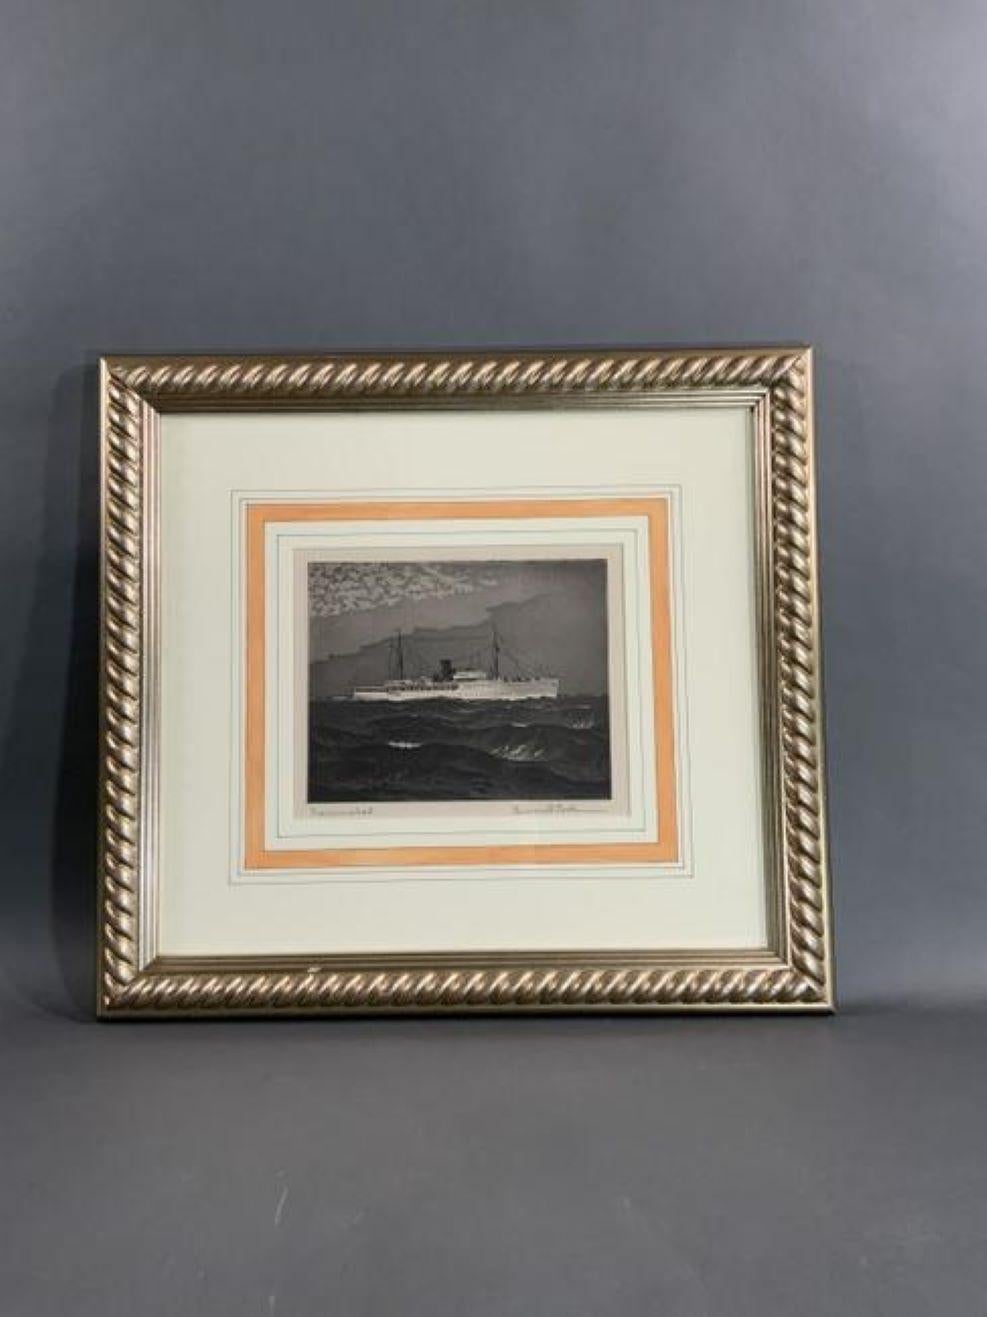 Signed engraving by Burnell Poole showing the private Steam yacht Nourmahal. This was Vincent Astors Yacht, built in Germany in 1928. The elegant yacht has a great history. Signed lower right. Weight is 8 pounds. 21